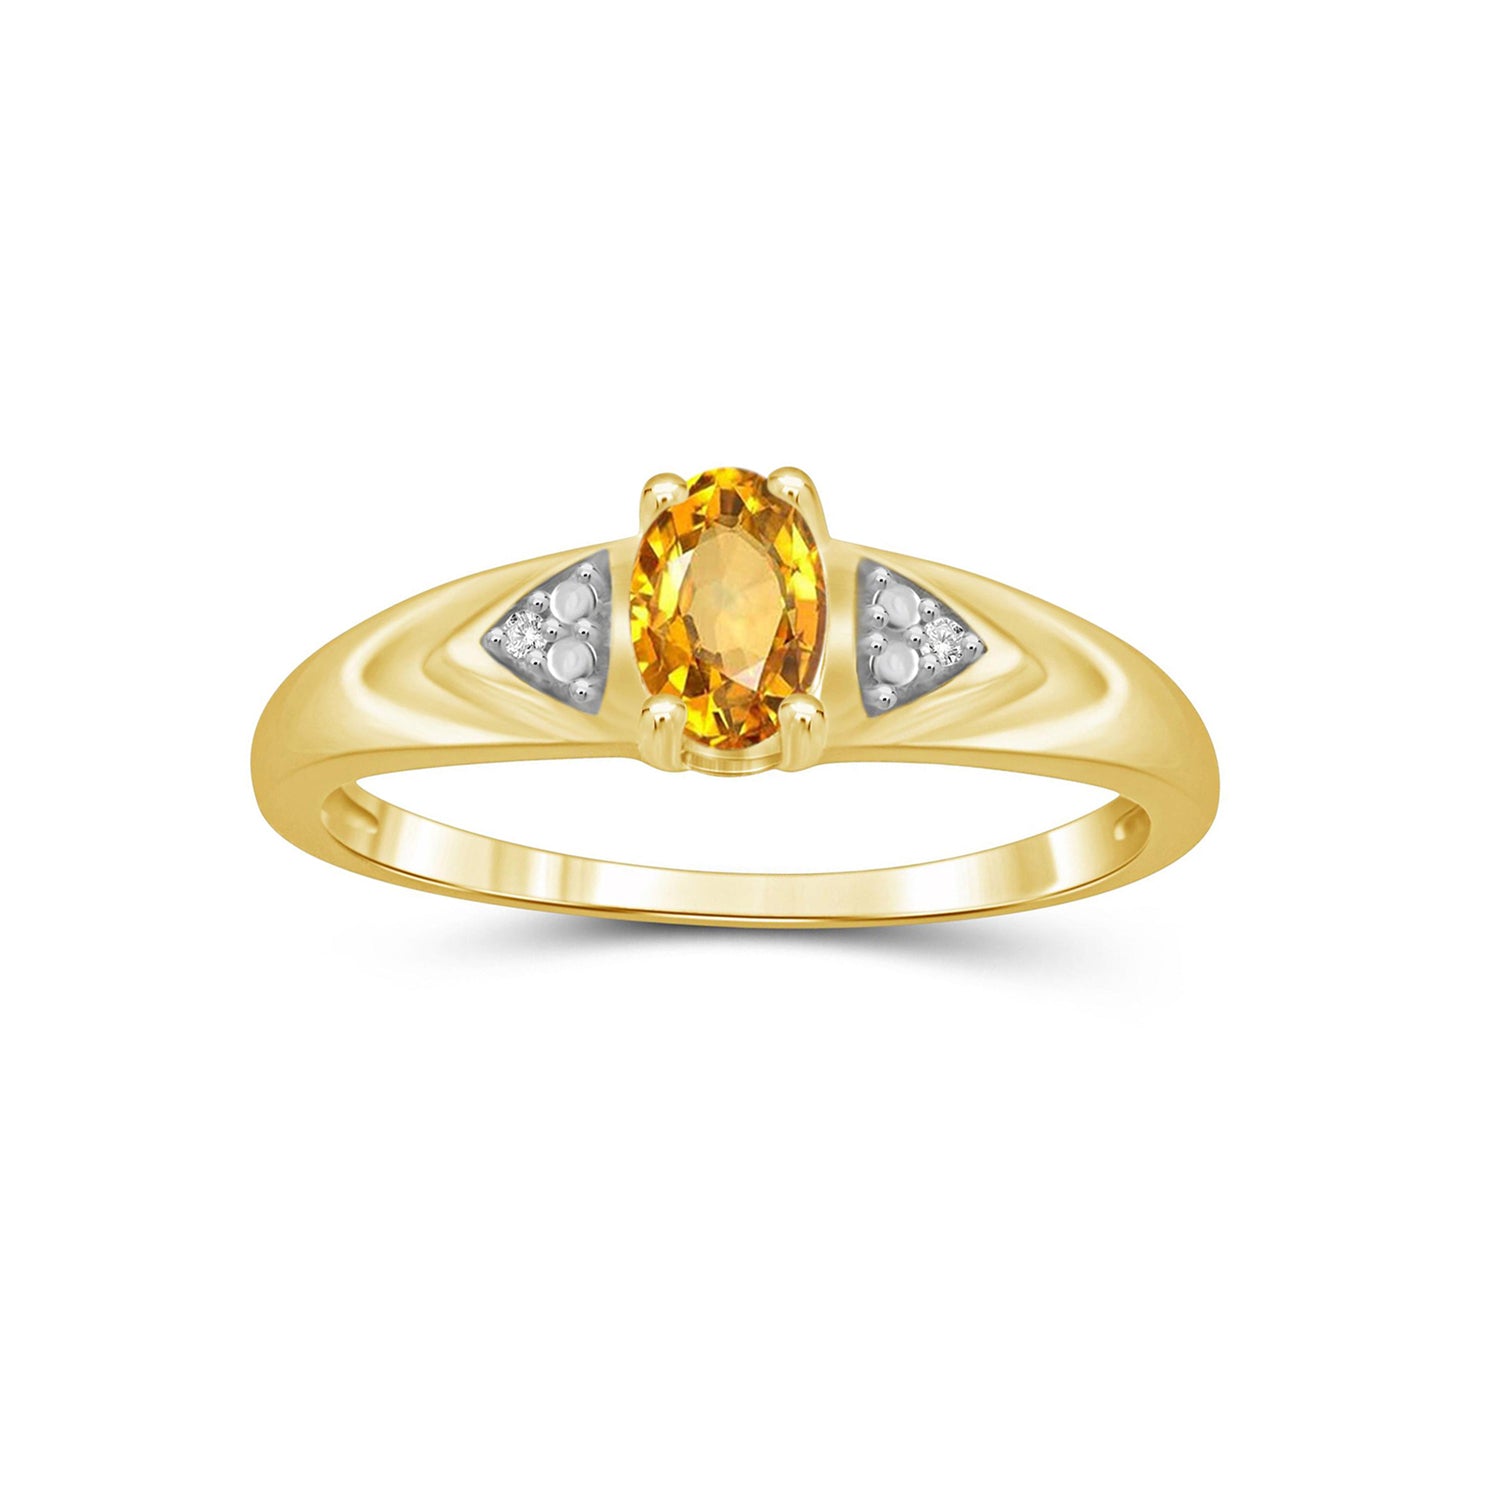 1/2ct TW Citrine and Diamond Accent 14K Gold-Plated Ring